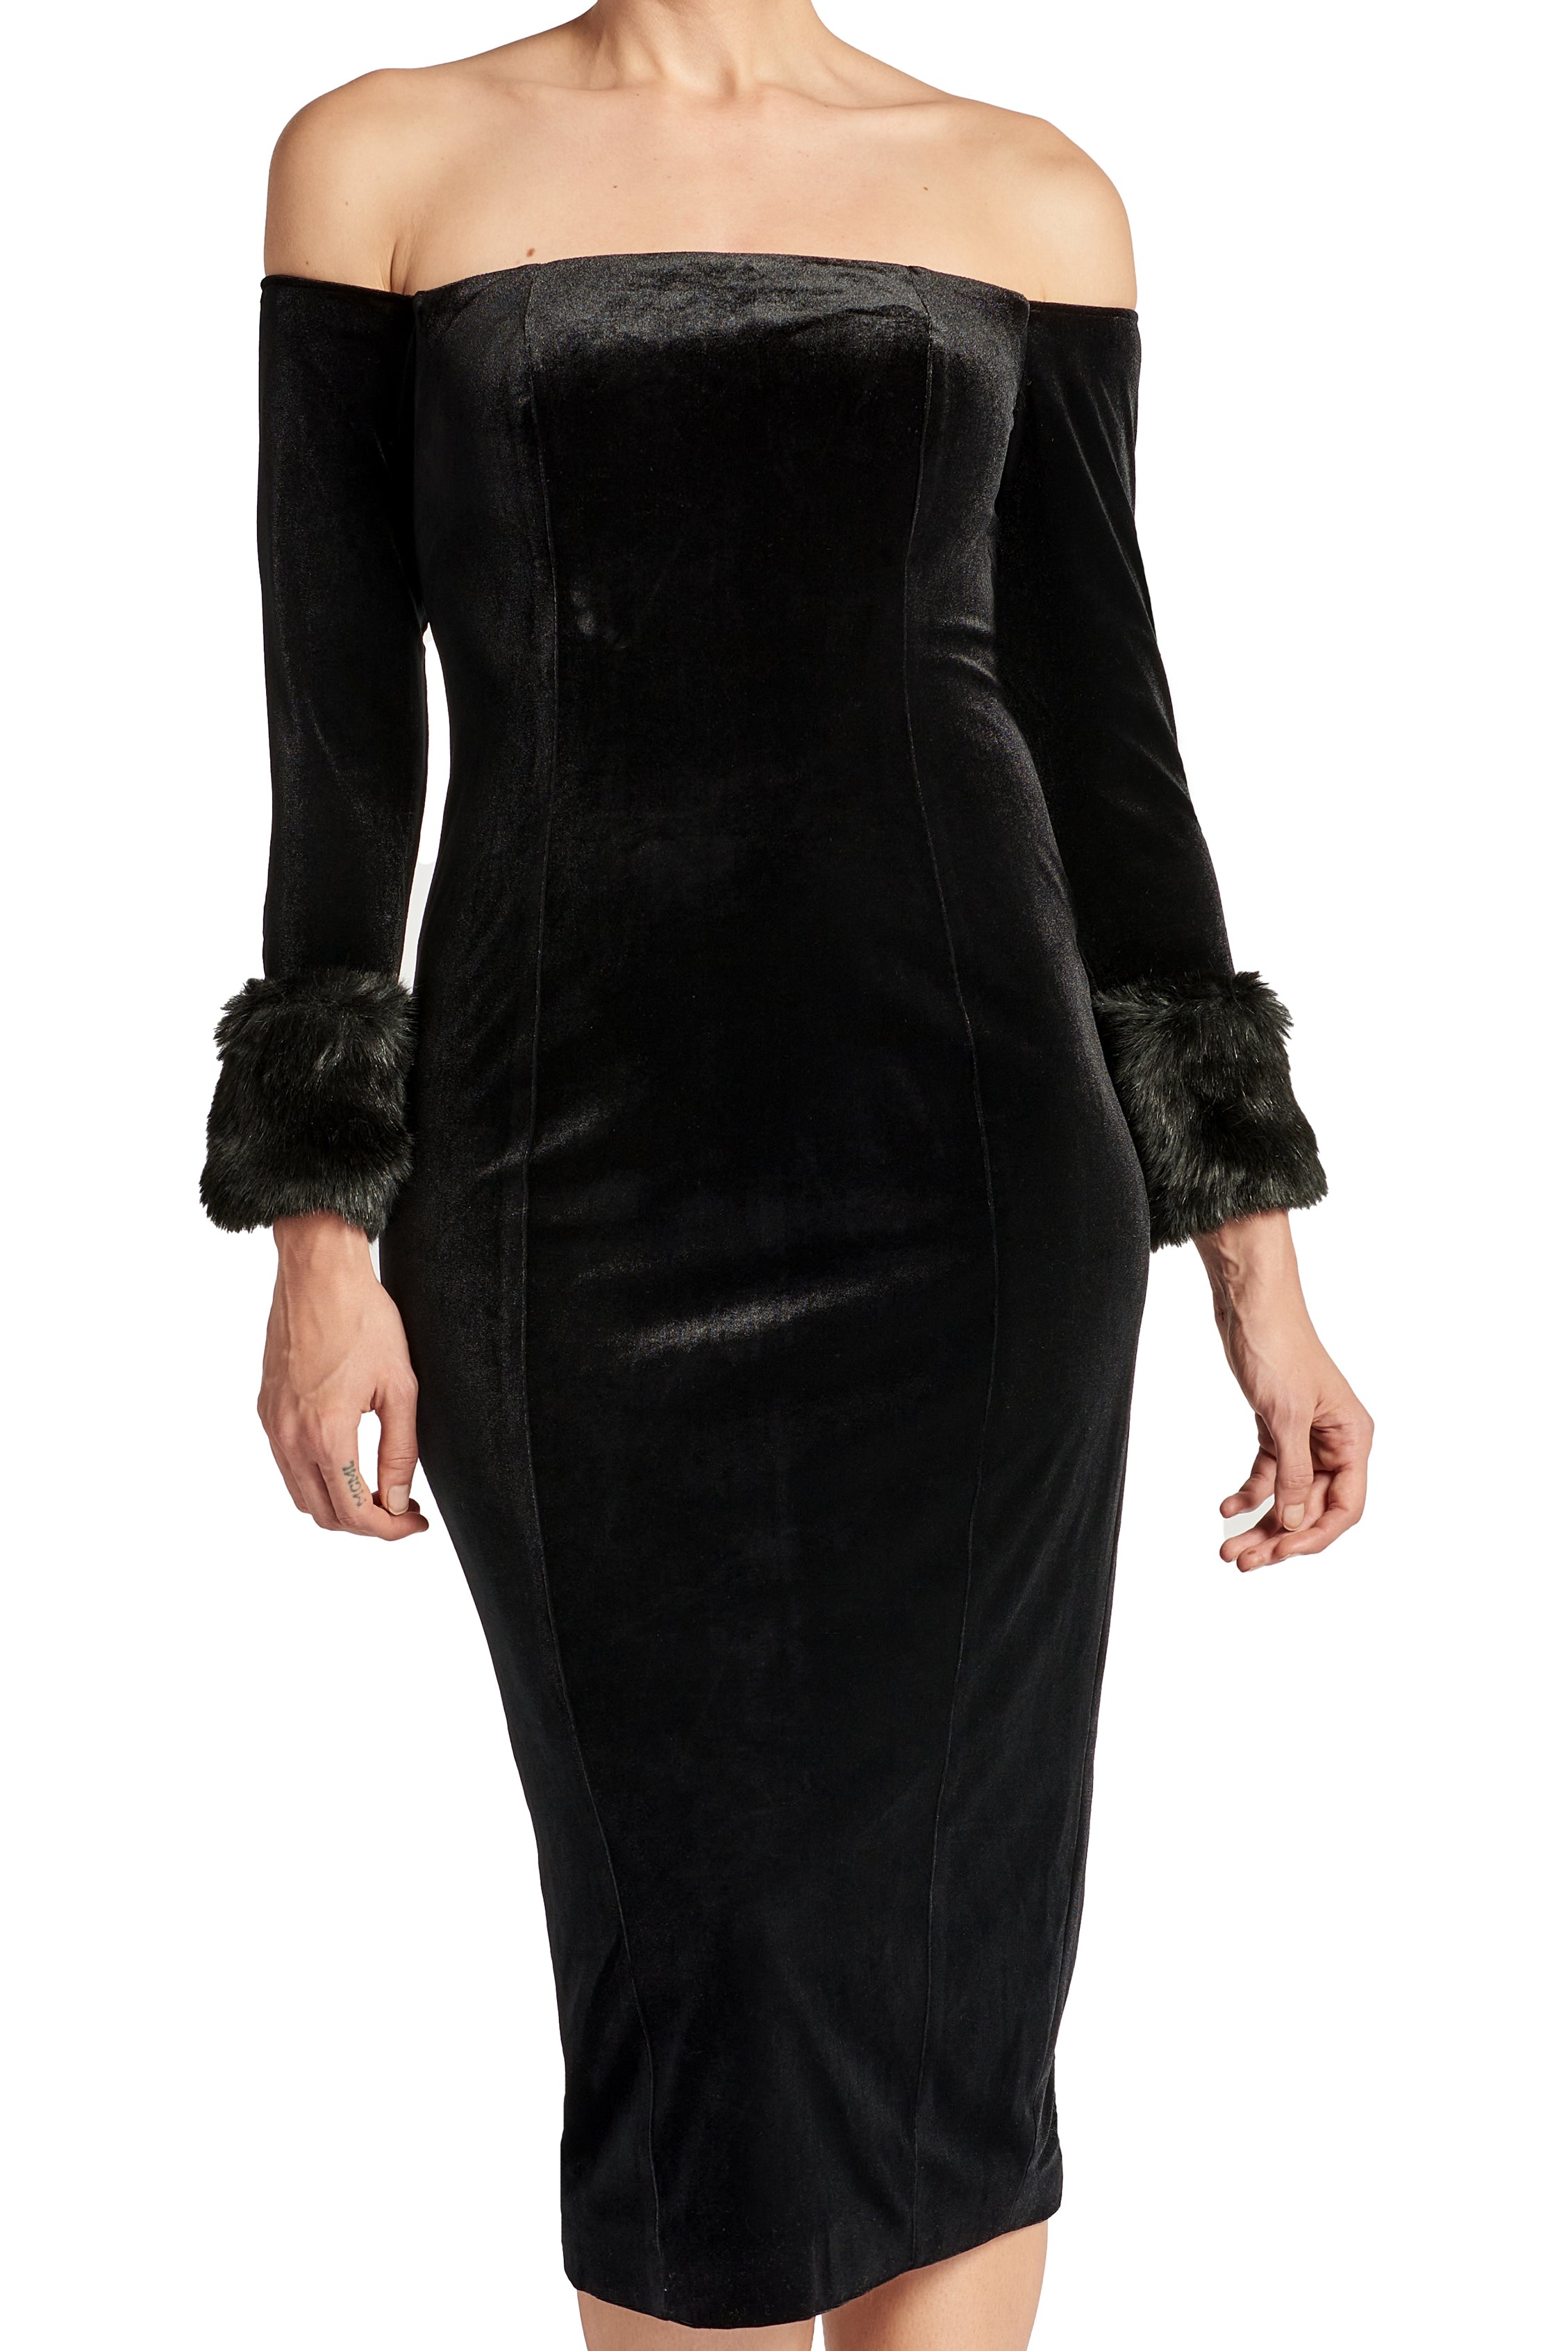 Close-up front view of model wearing the Simona Maghen Joia Dress, off the shoulder black velvet fitted midi dress with long sleeves and faux fur cuffs.